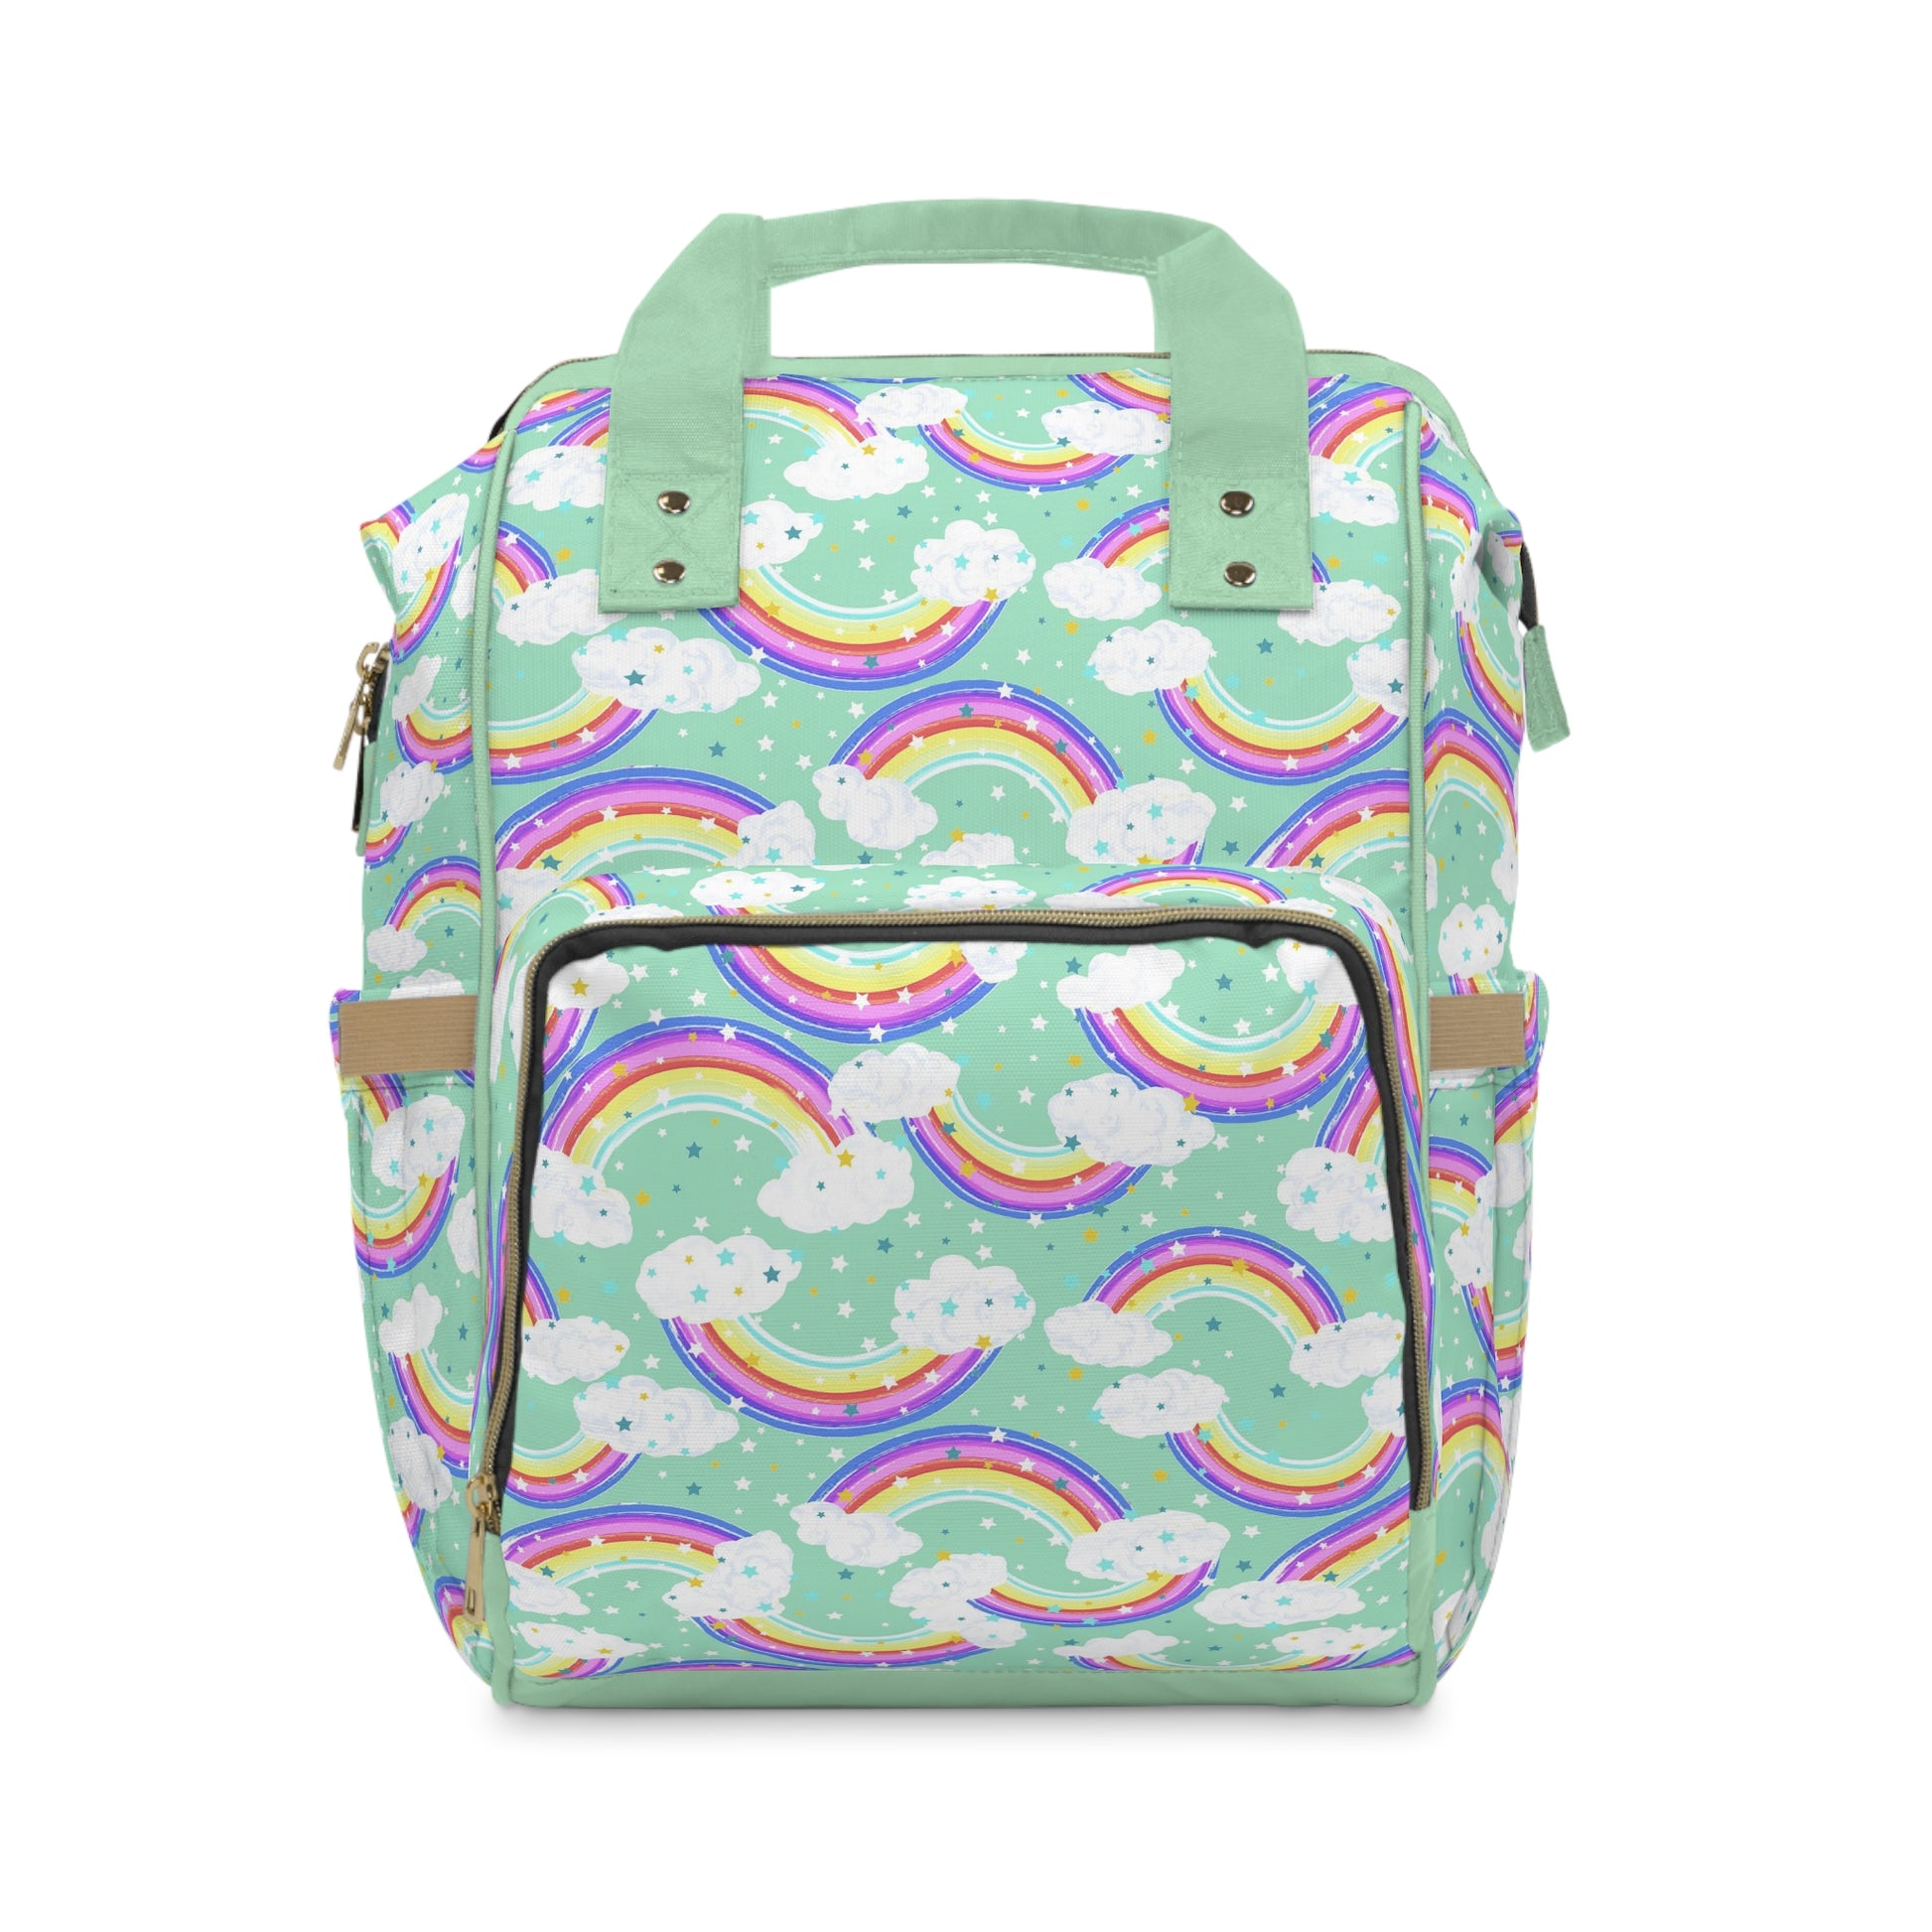 Unique green rainbow-themed baby changing backpack for stylish and practical parenting